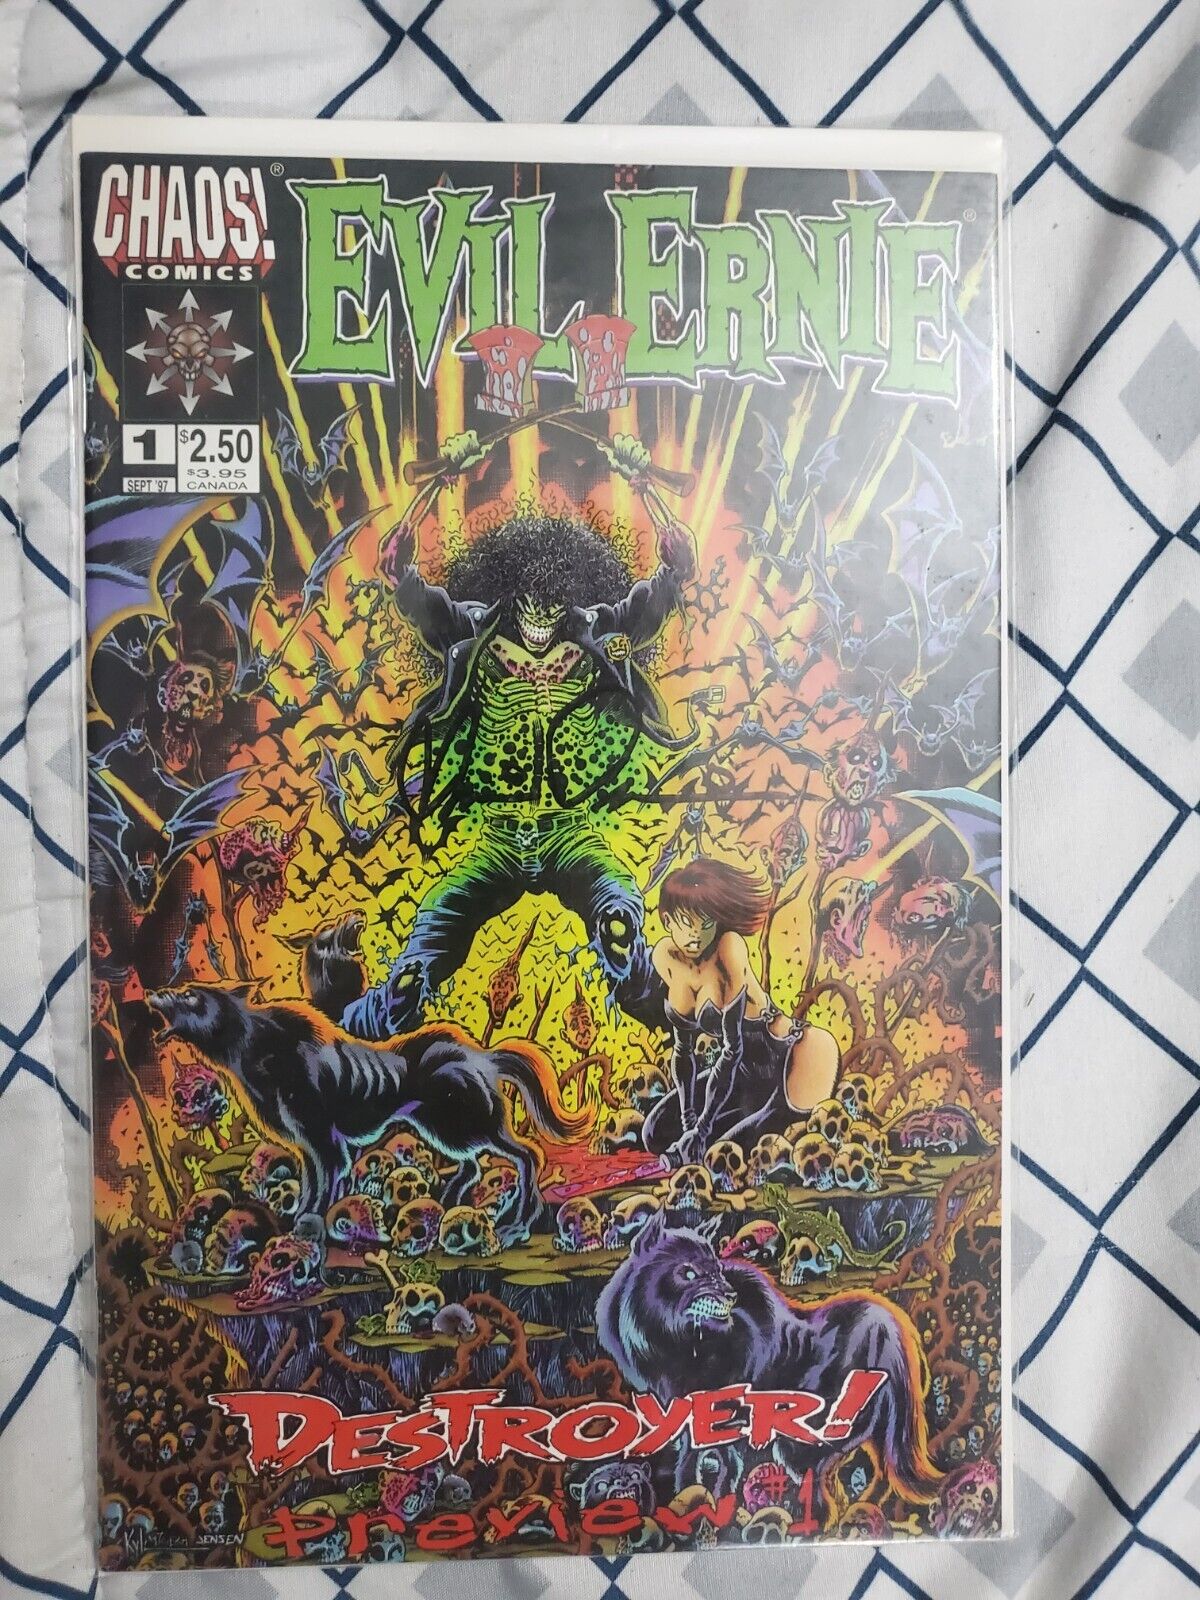 1997 Chaos Comics Evil Ernie Destroyer Preview #1 Signed By Brian Pulido